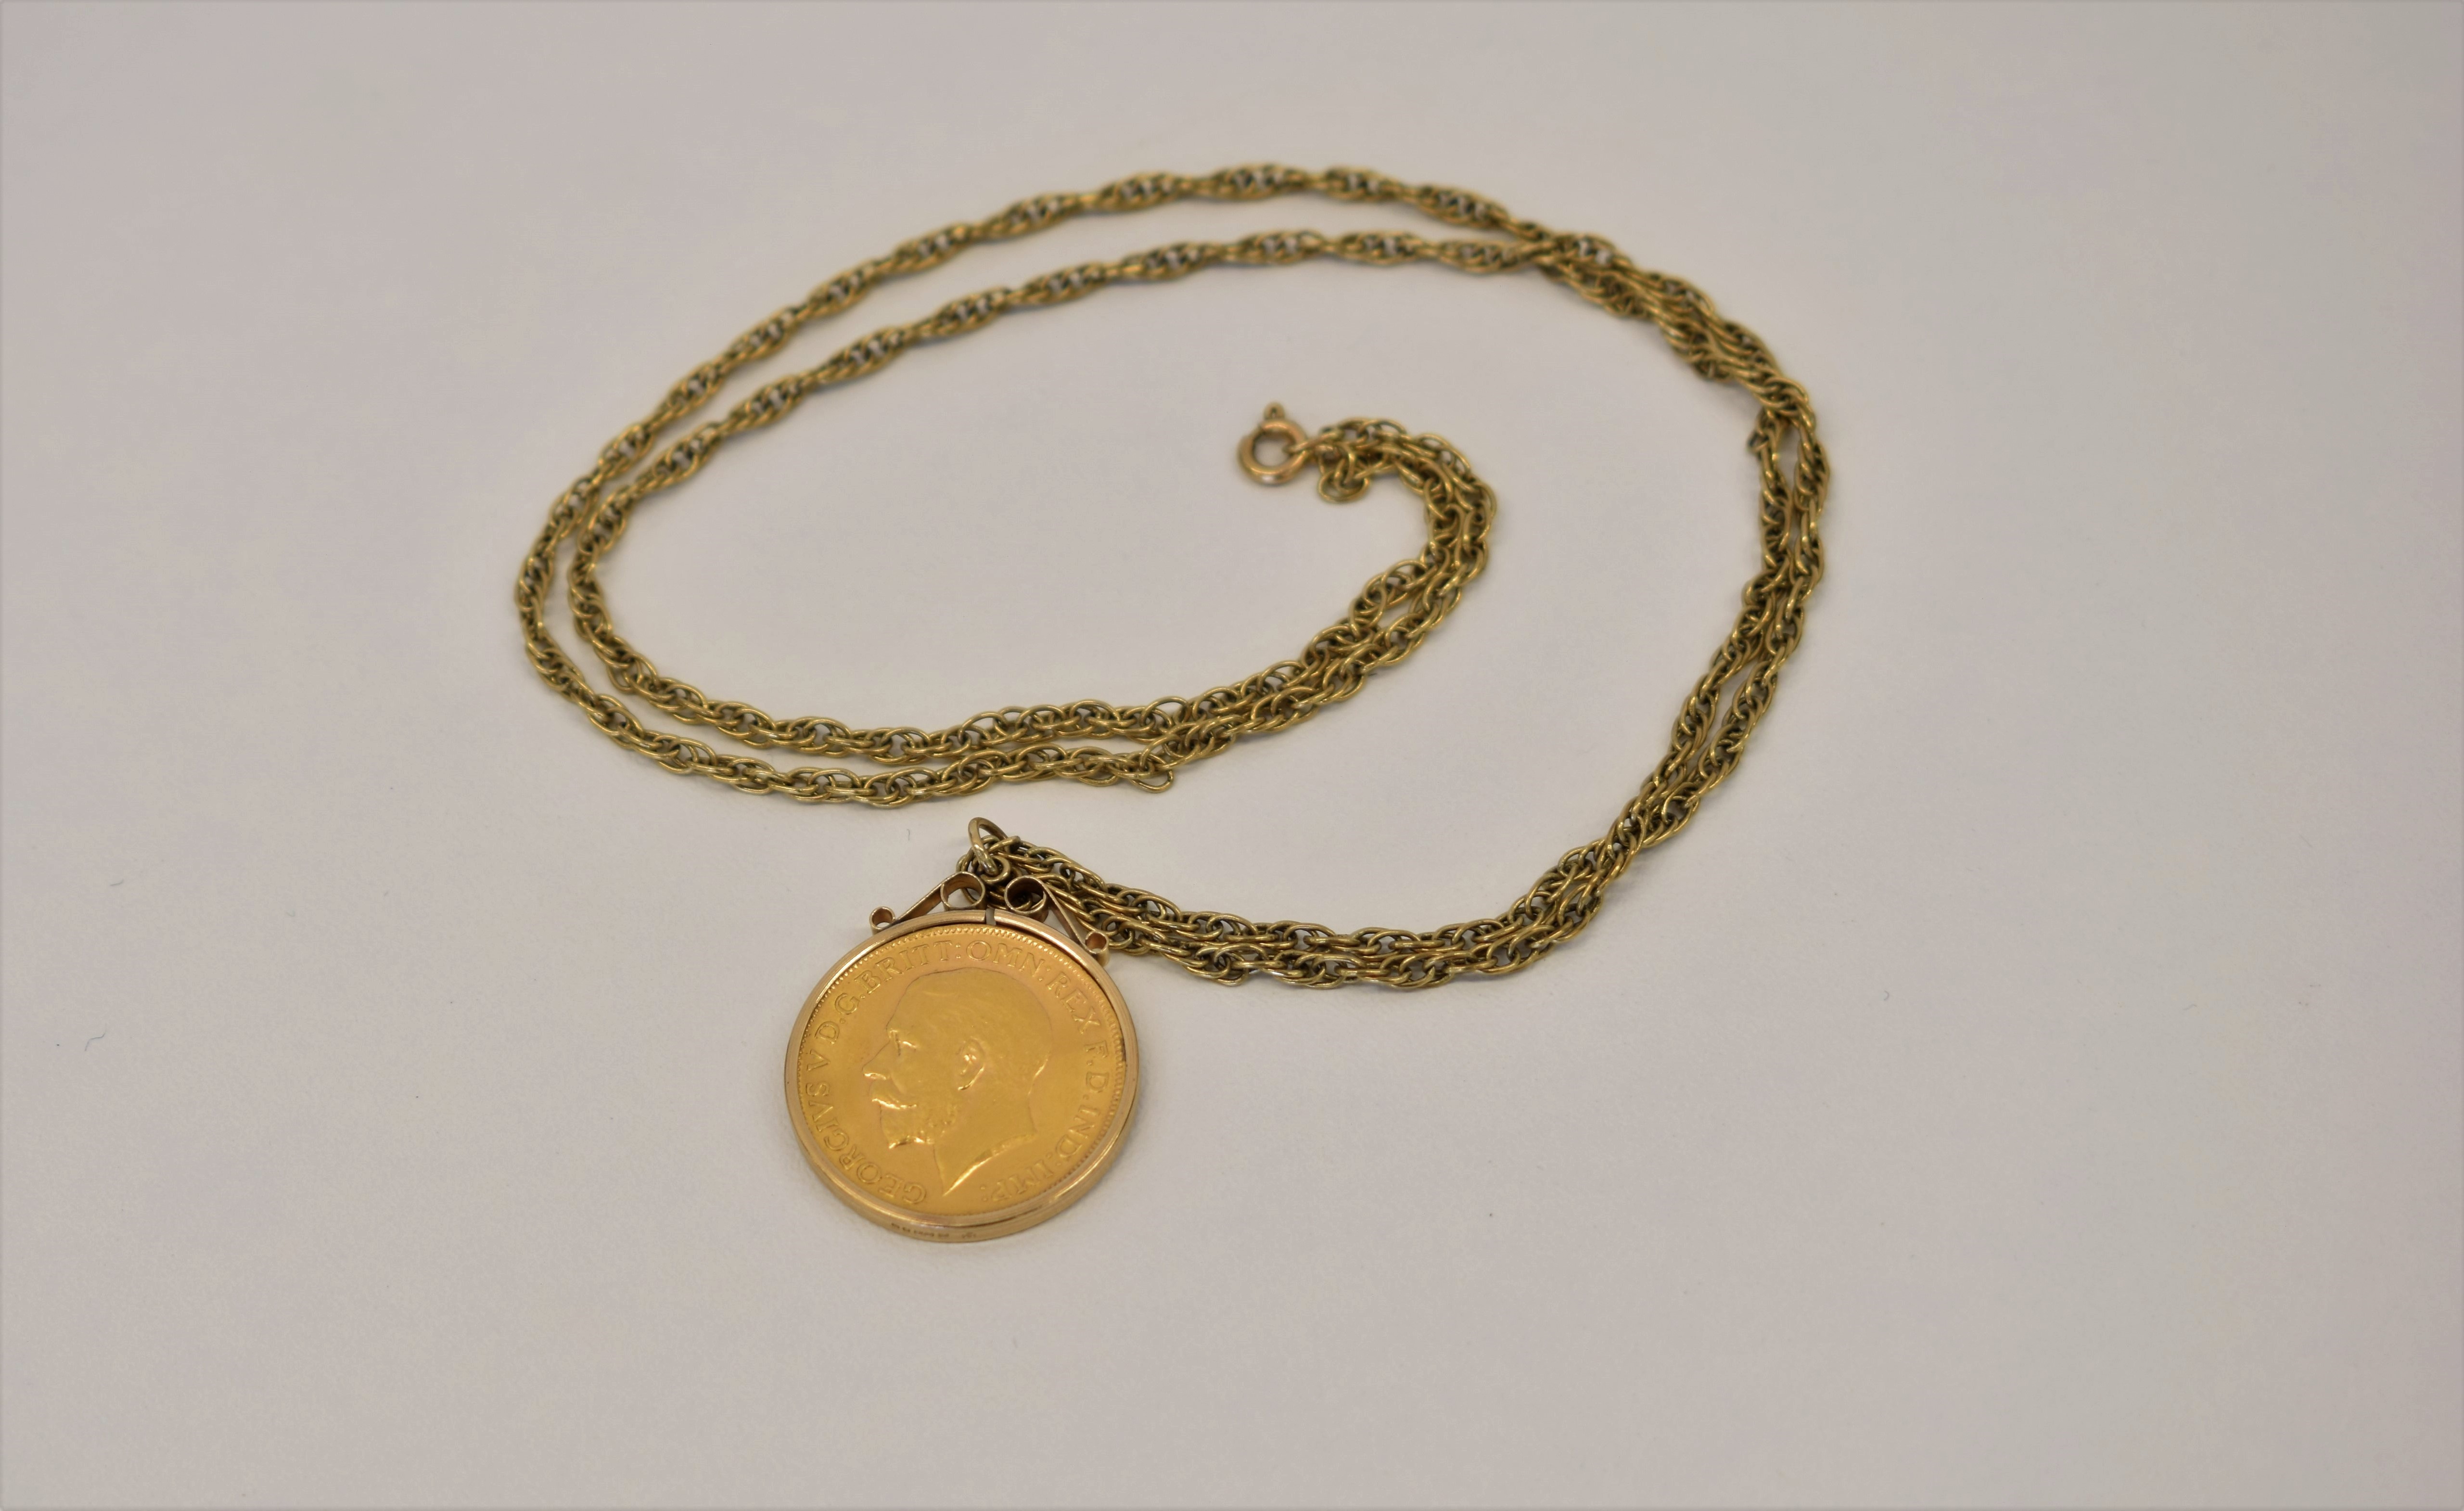 22ct and 14ct gold non-hallmarked sovereign and chains - Image 2 of 2